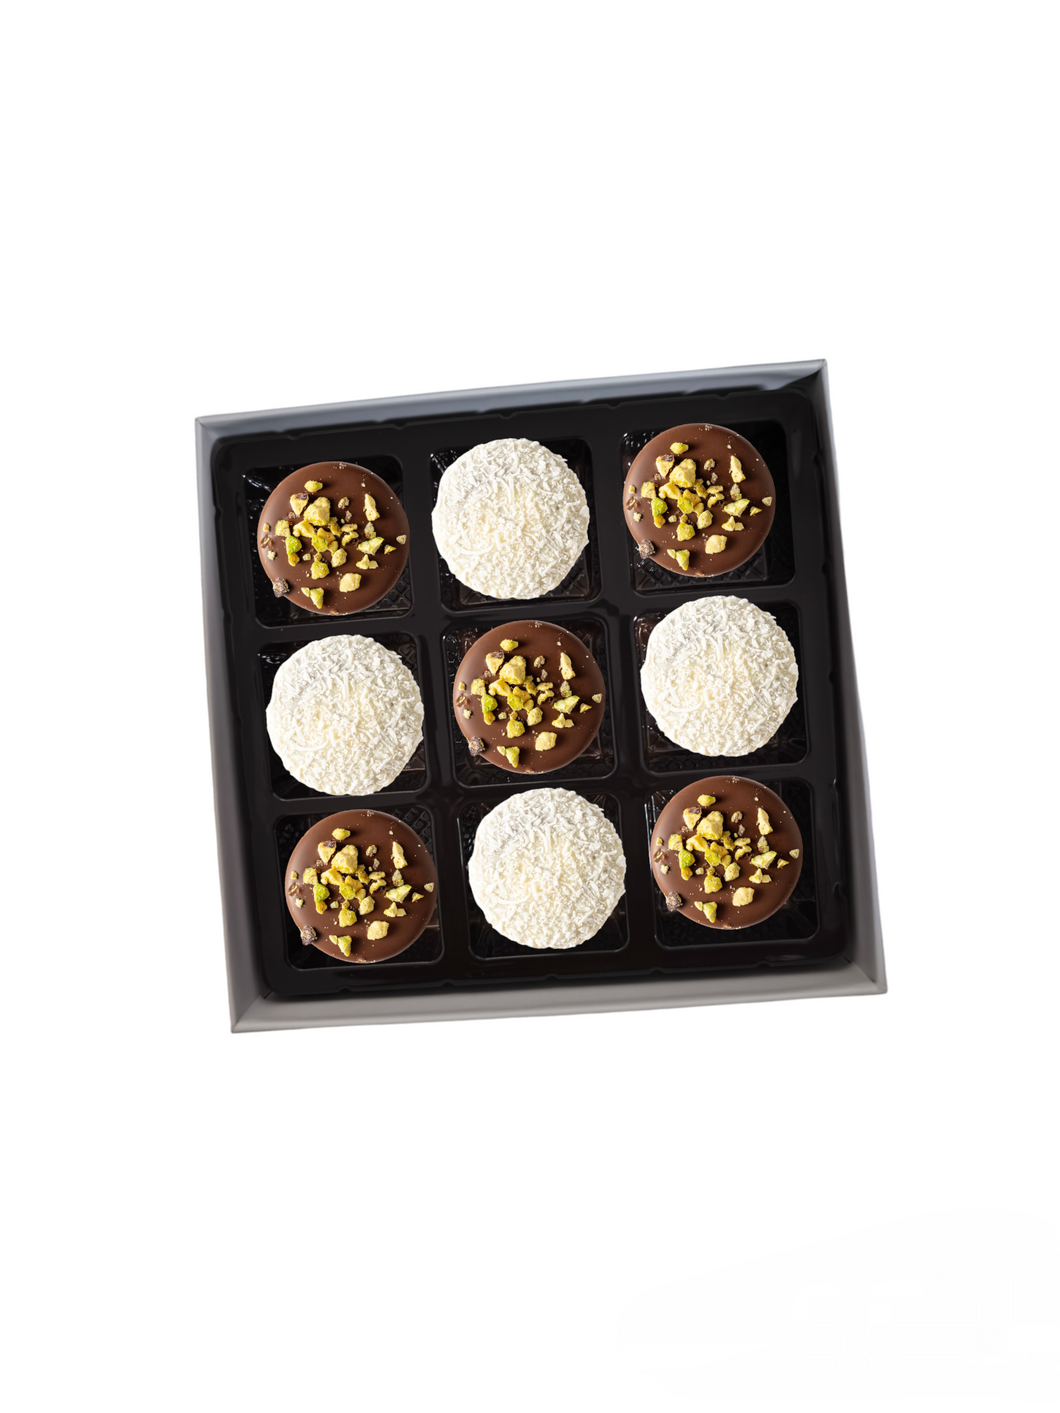 20%OFF: Pistachio and Coconut Belgian Chocolates (9 PCs) in White Gift Box